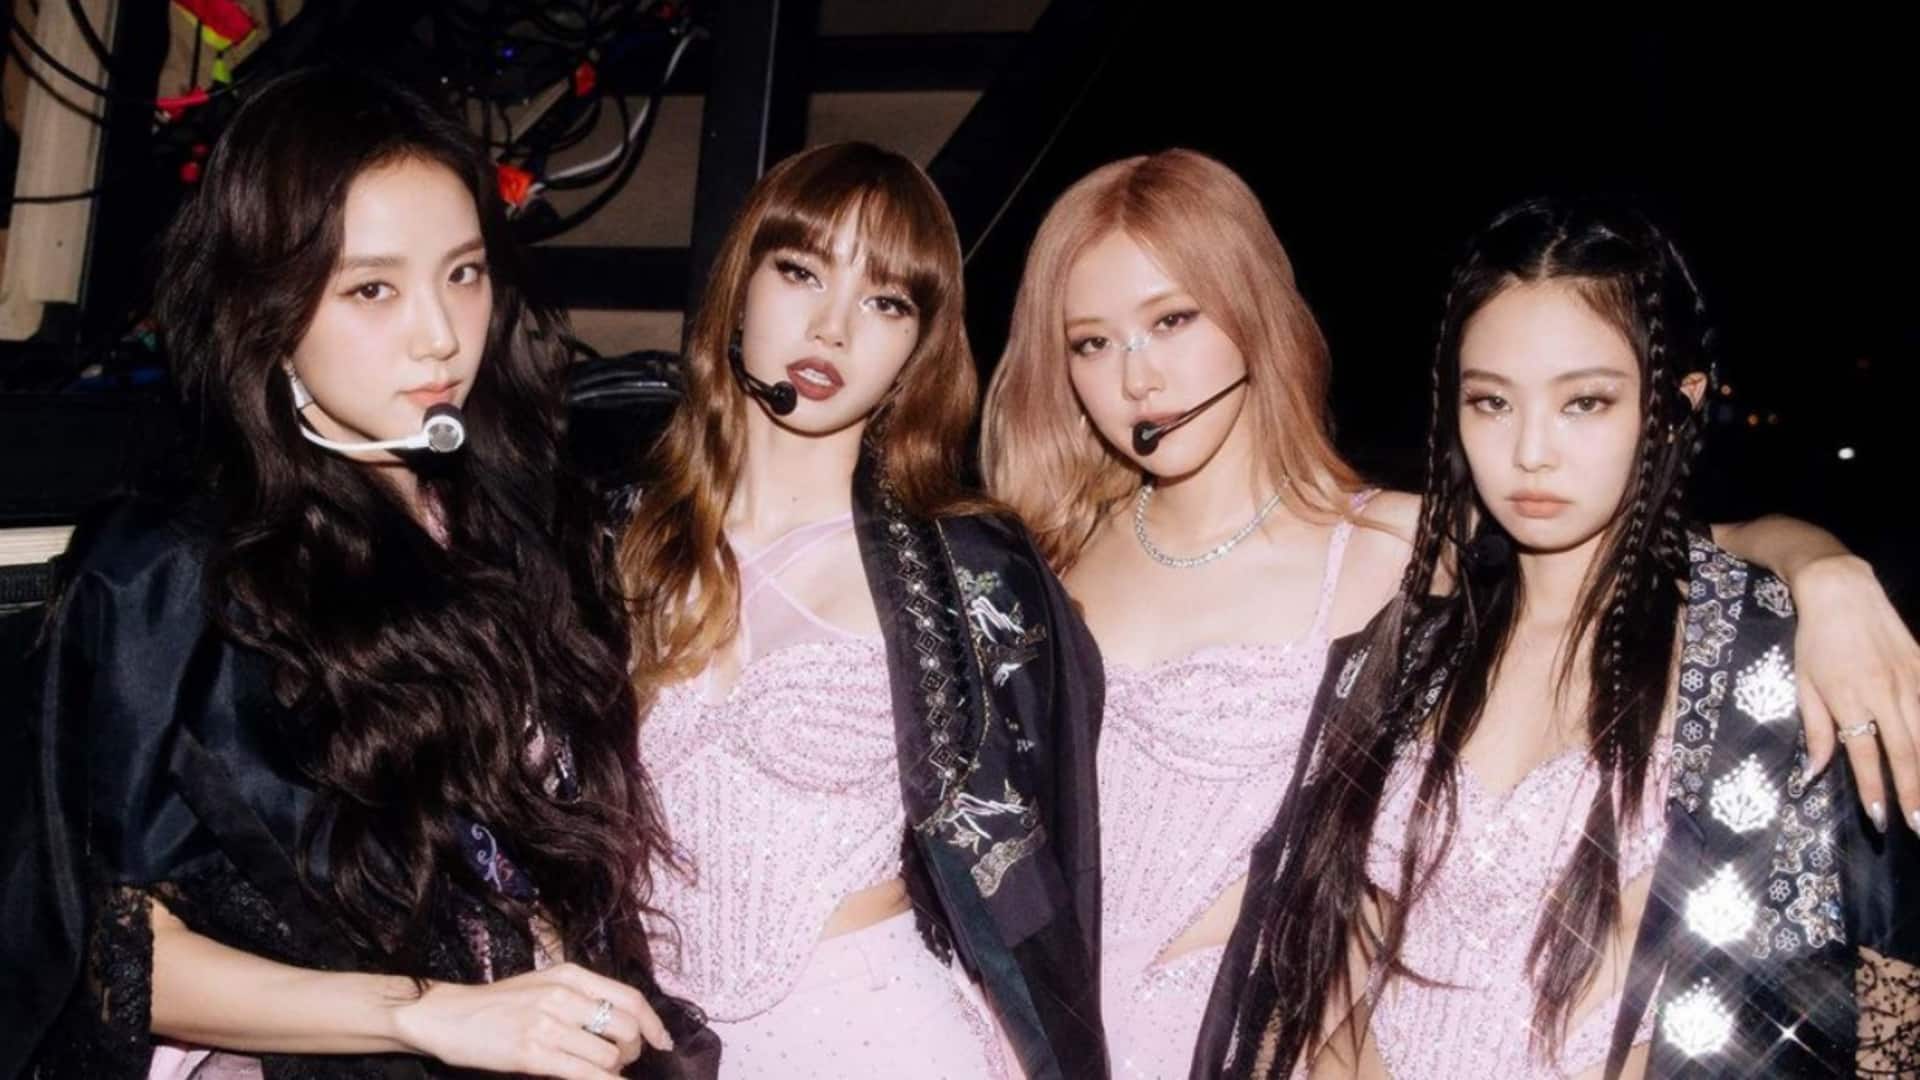 BLACKPINK becomes 1st girl band to sell out Allegiant Stadium